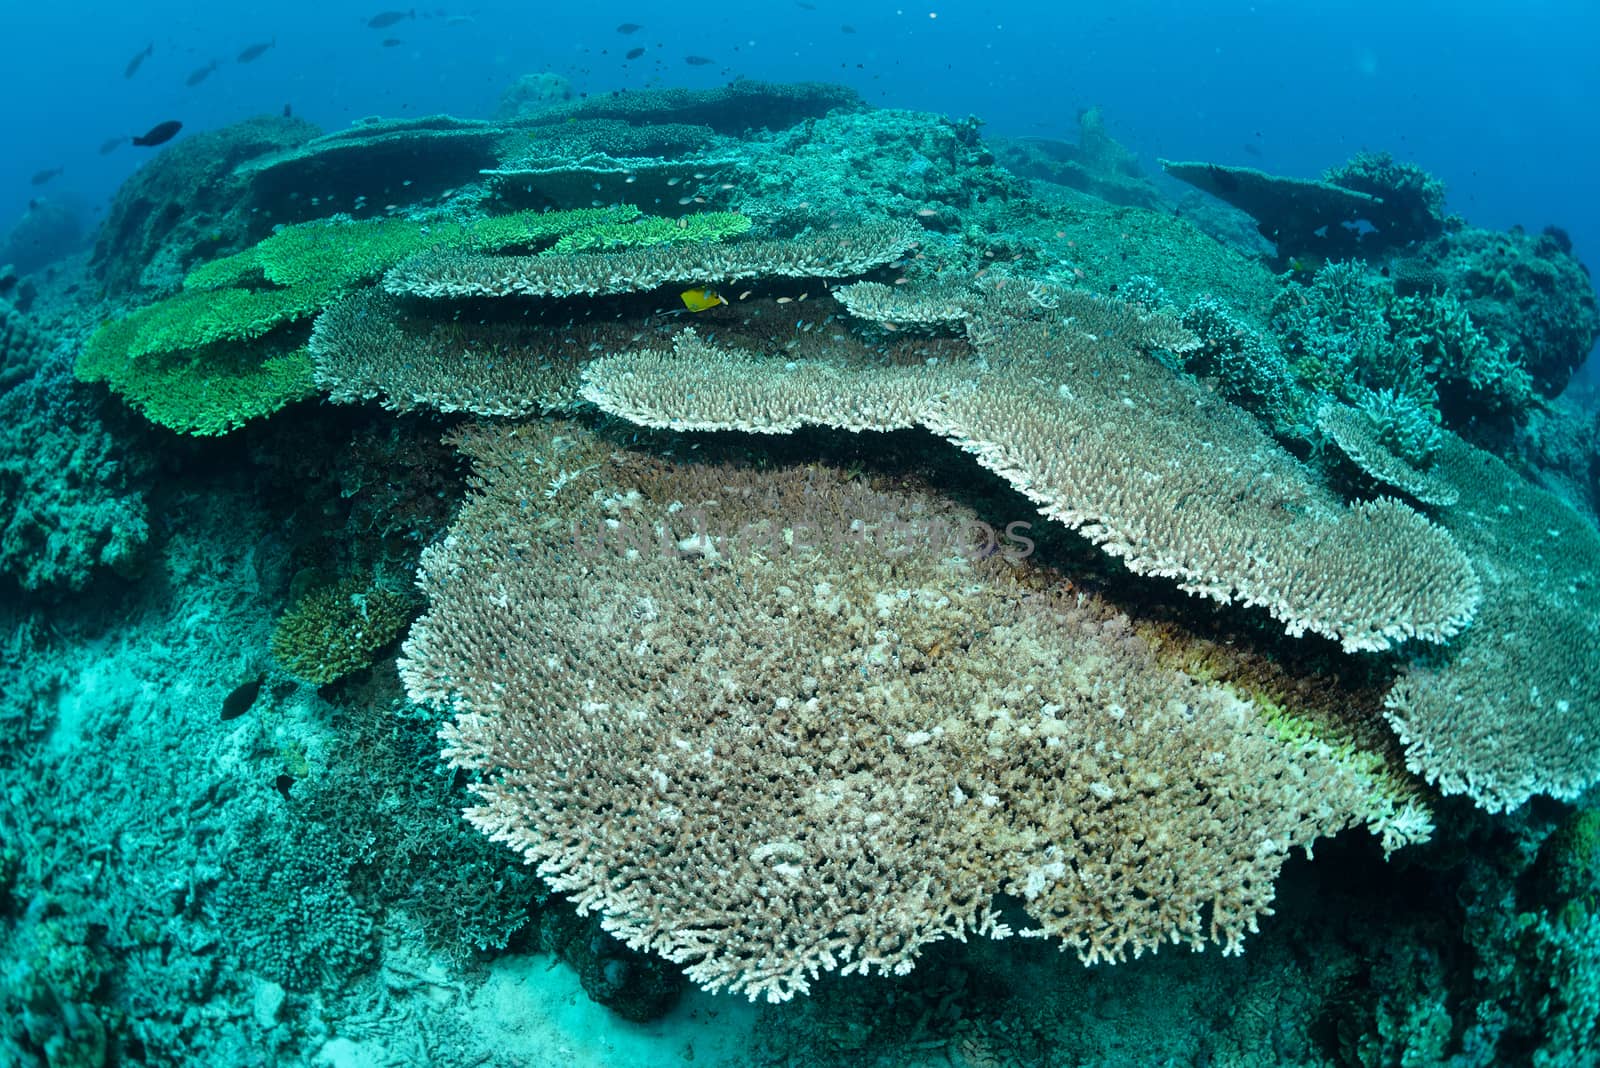 Underwater staghorn table coral in Sipadan, Malaysia by think4photop